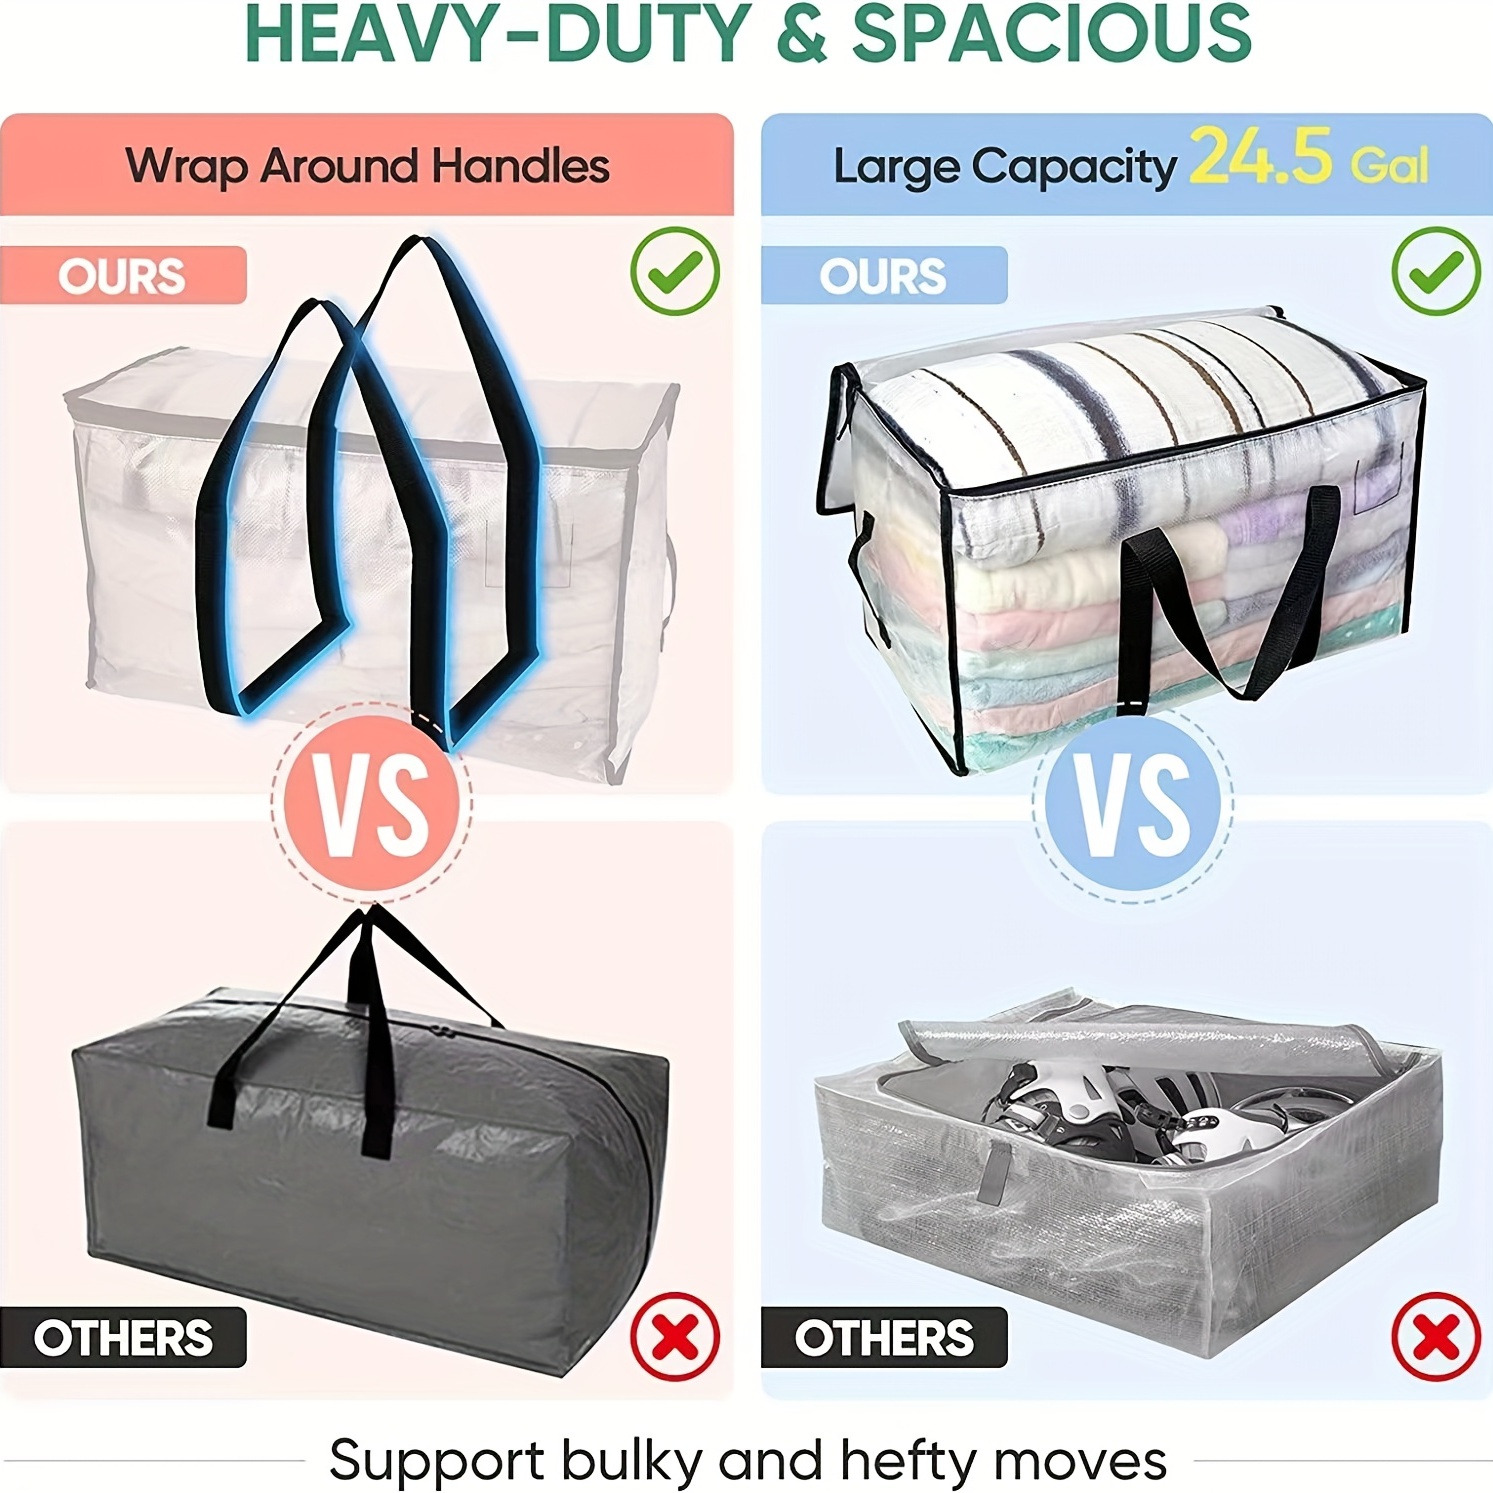 Heavy vs medium duty bags: Which are best for businesses and why?